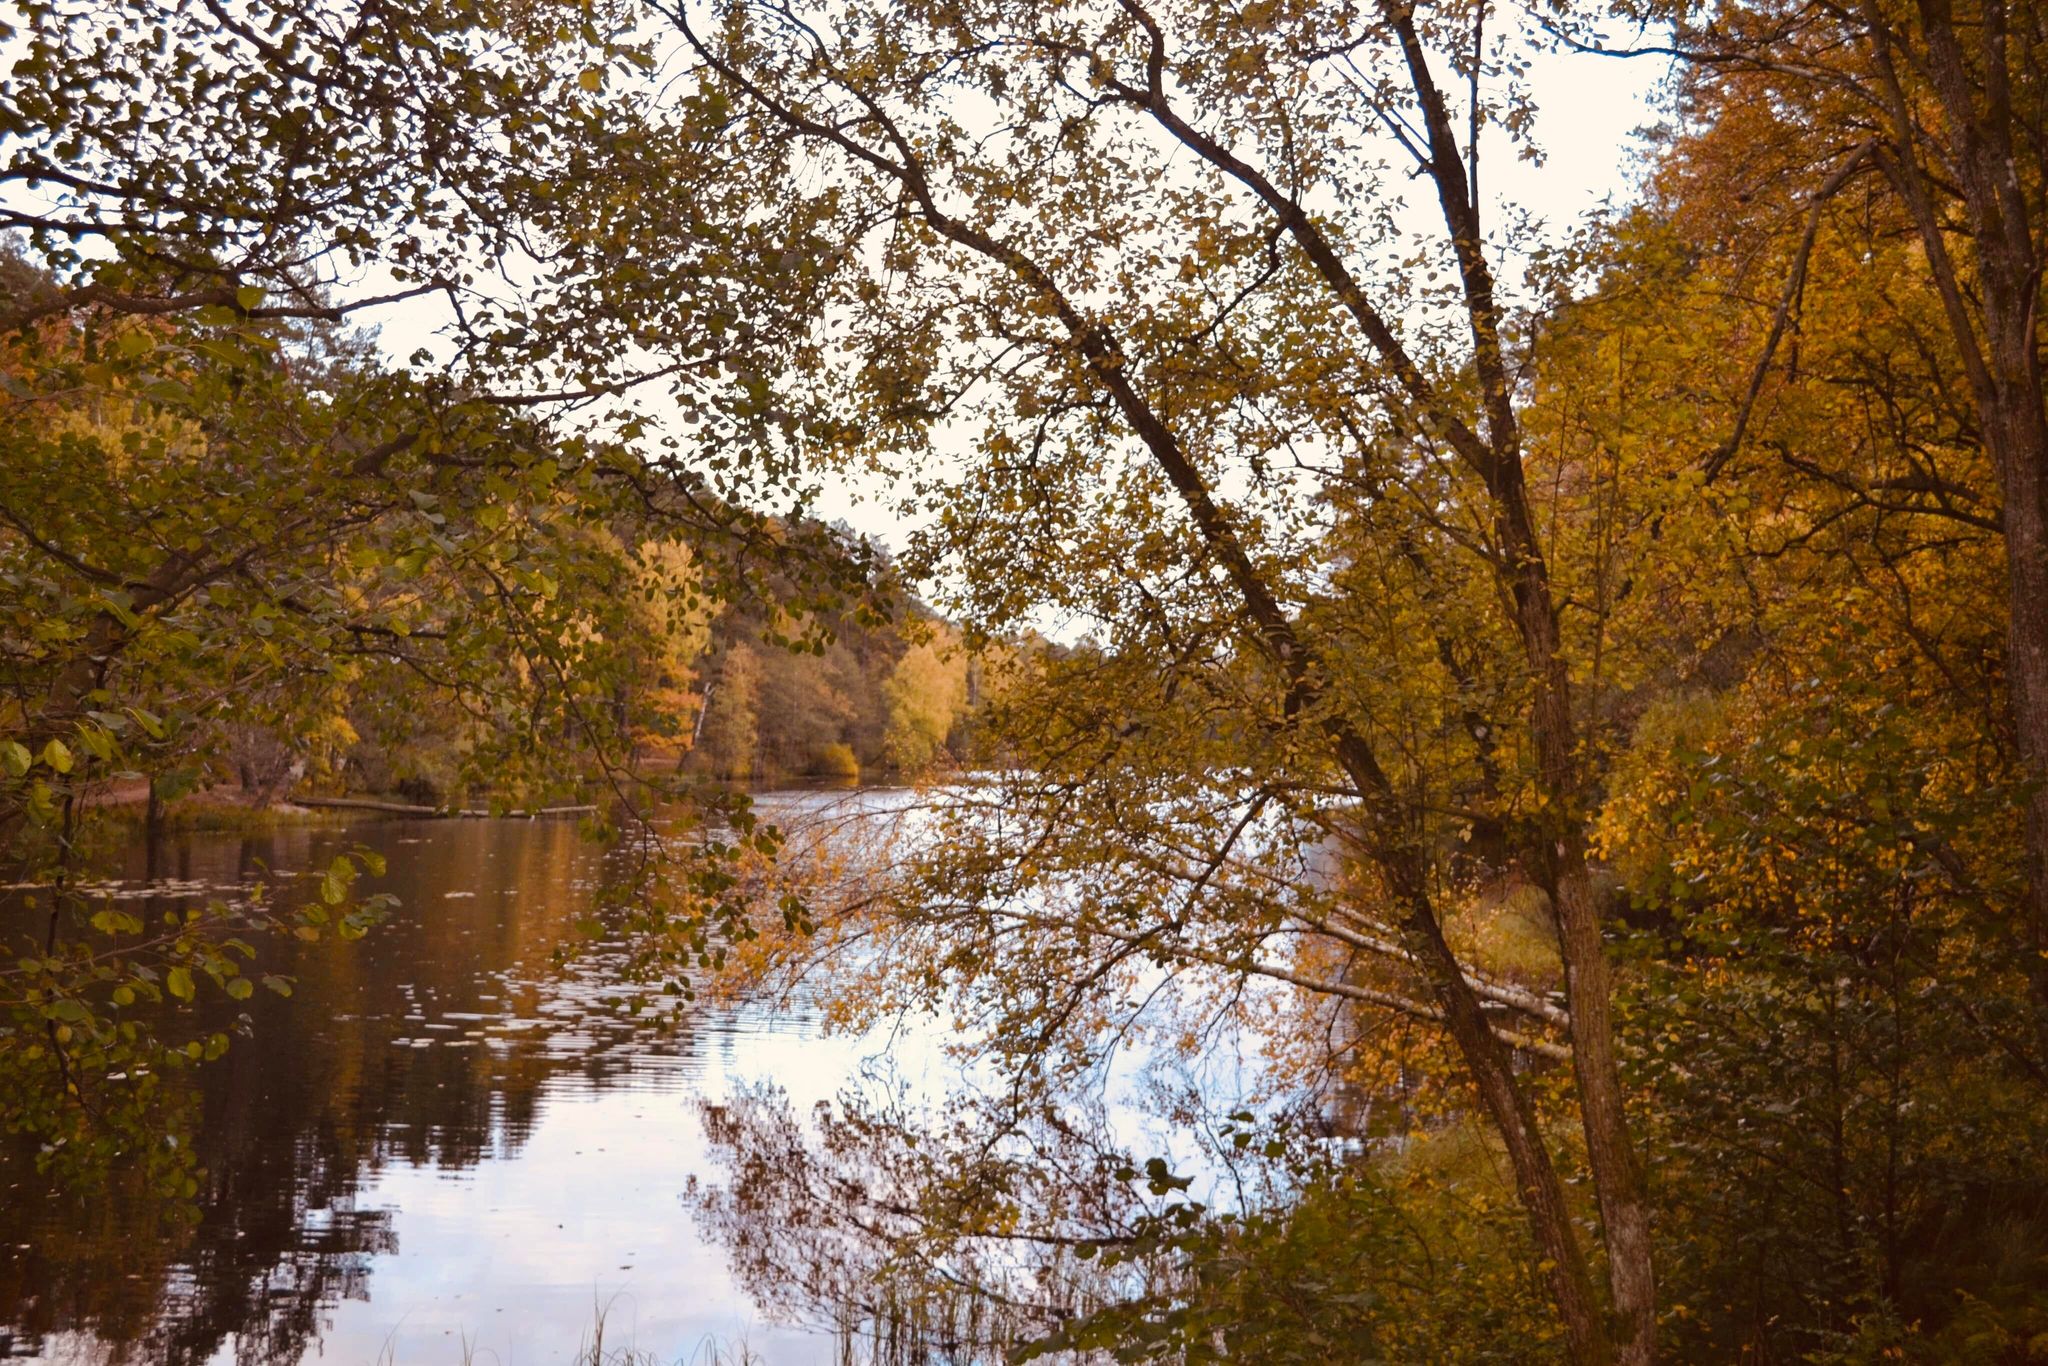 General 2048x1366 nature fall trees leaves river outdoors water